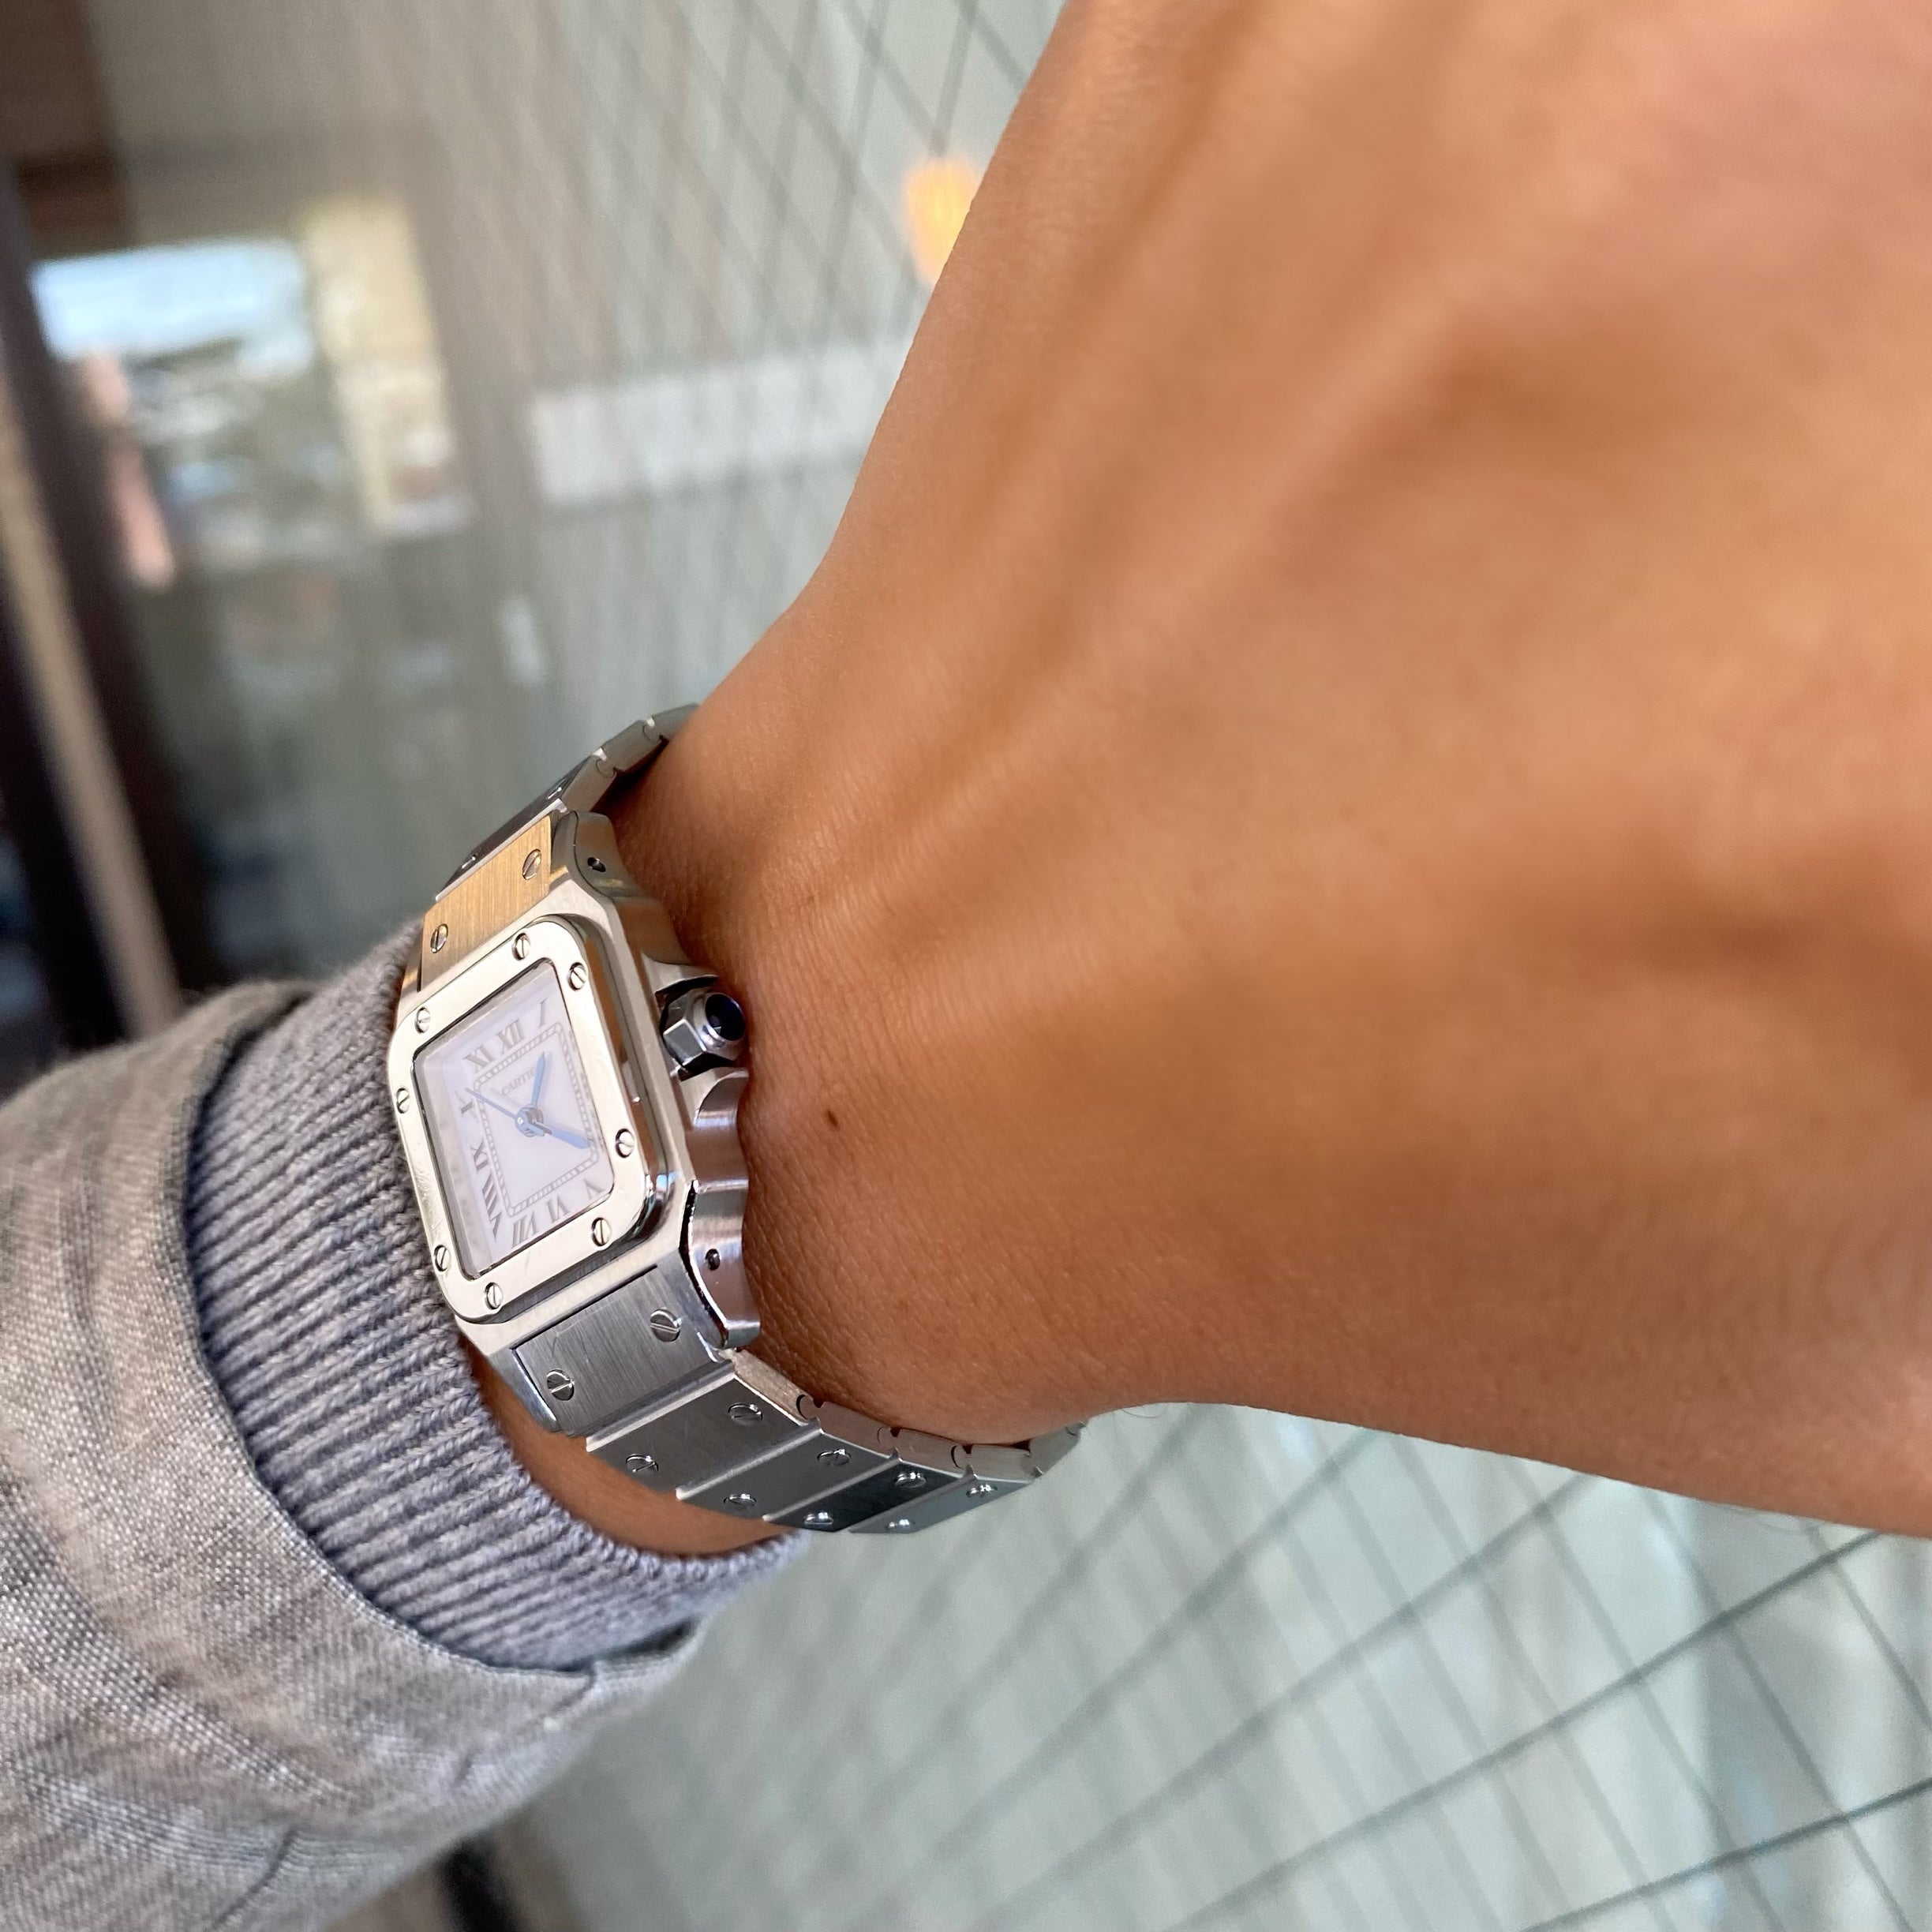 [CARTIER] With Santo Sugarbe SM Stainless Automatic Winding Permanent Warranty